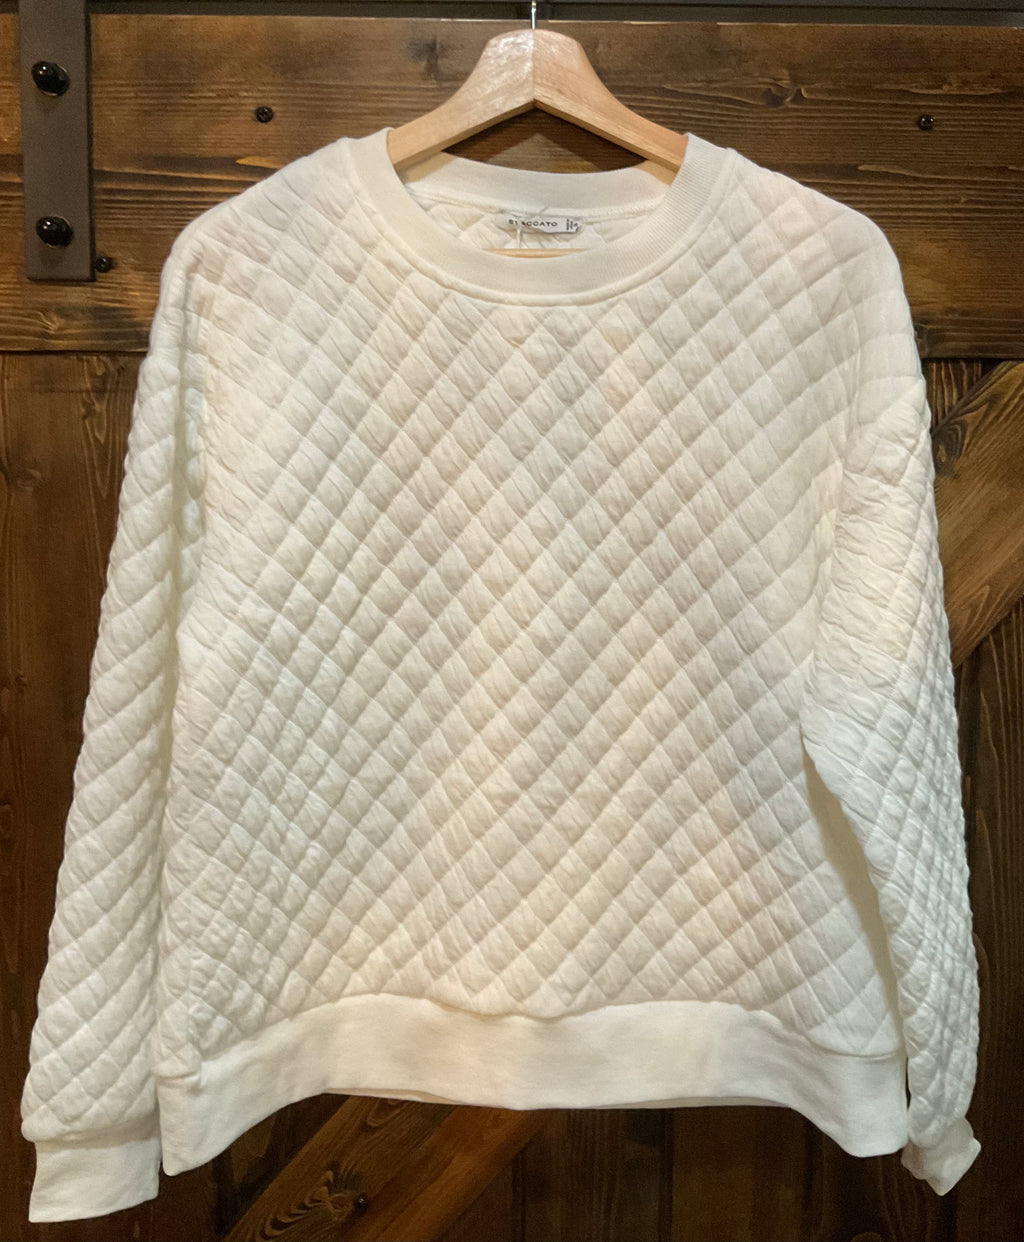 Crew neck quilted knit top